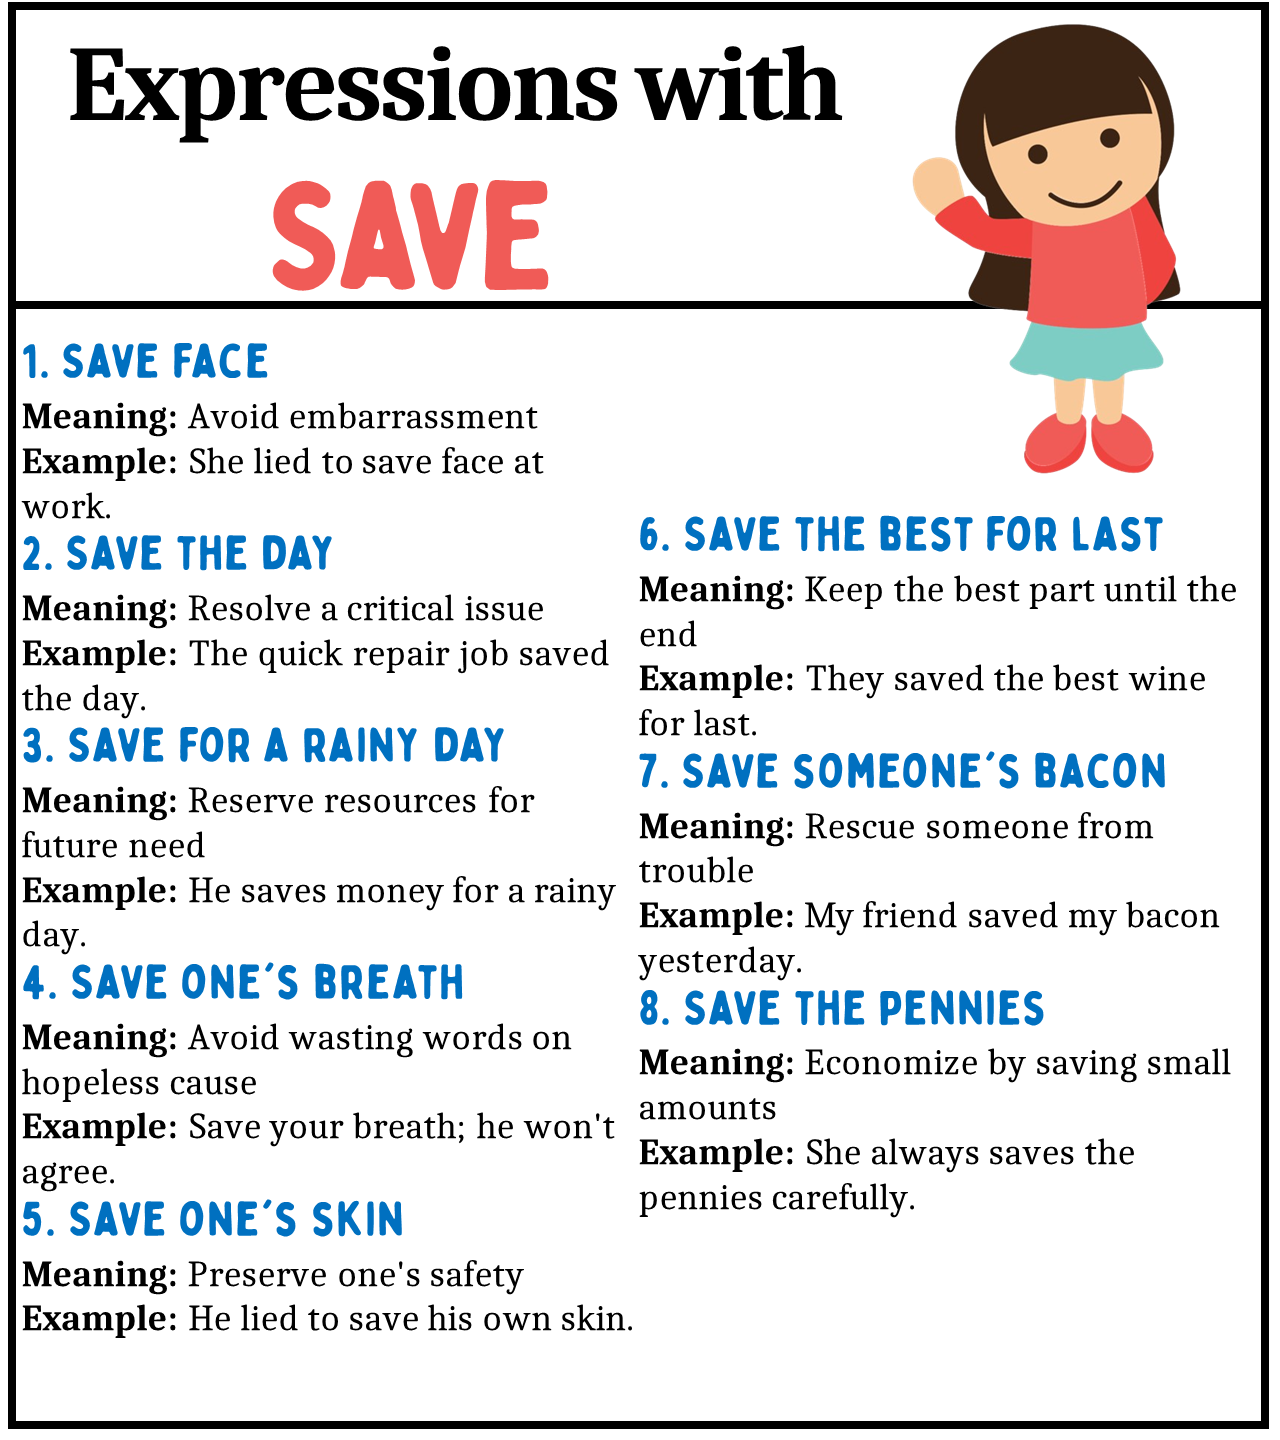 Expressions with SAVE